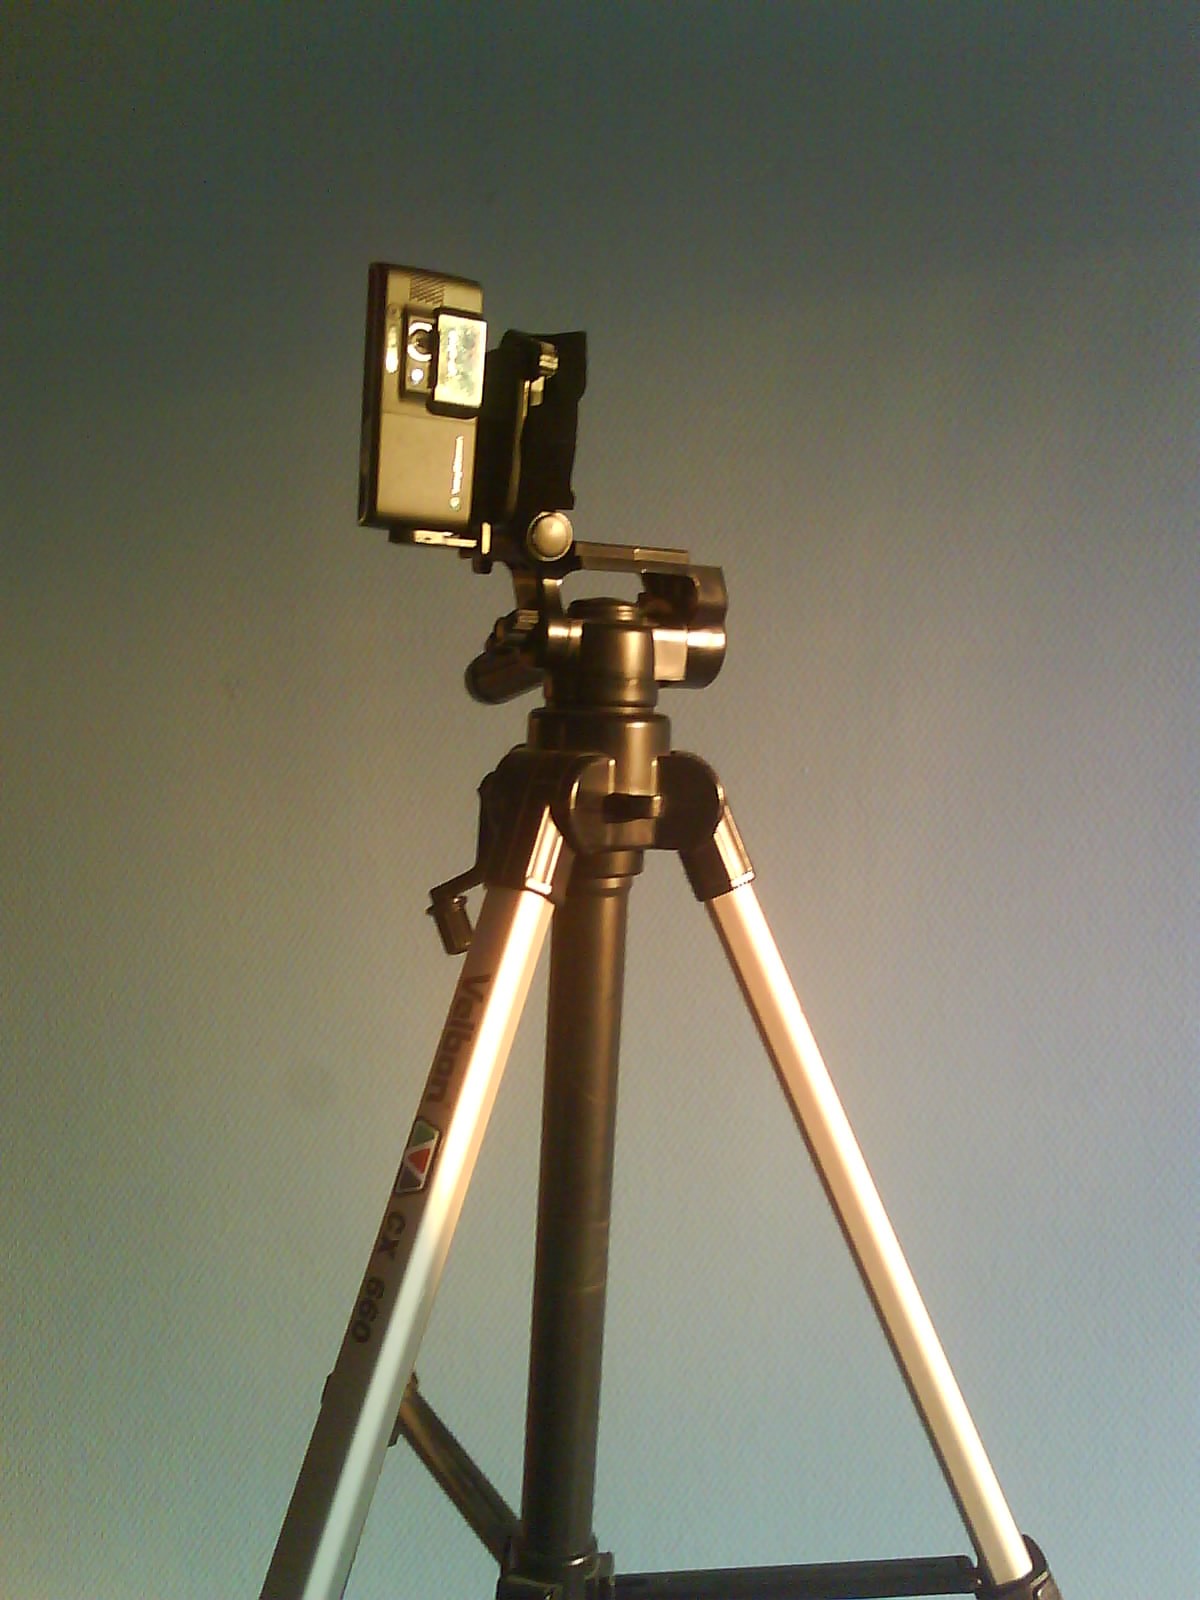 a tripod holding a camera and some kind of item